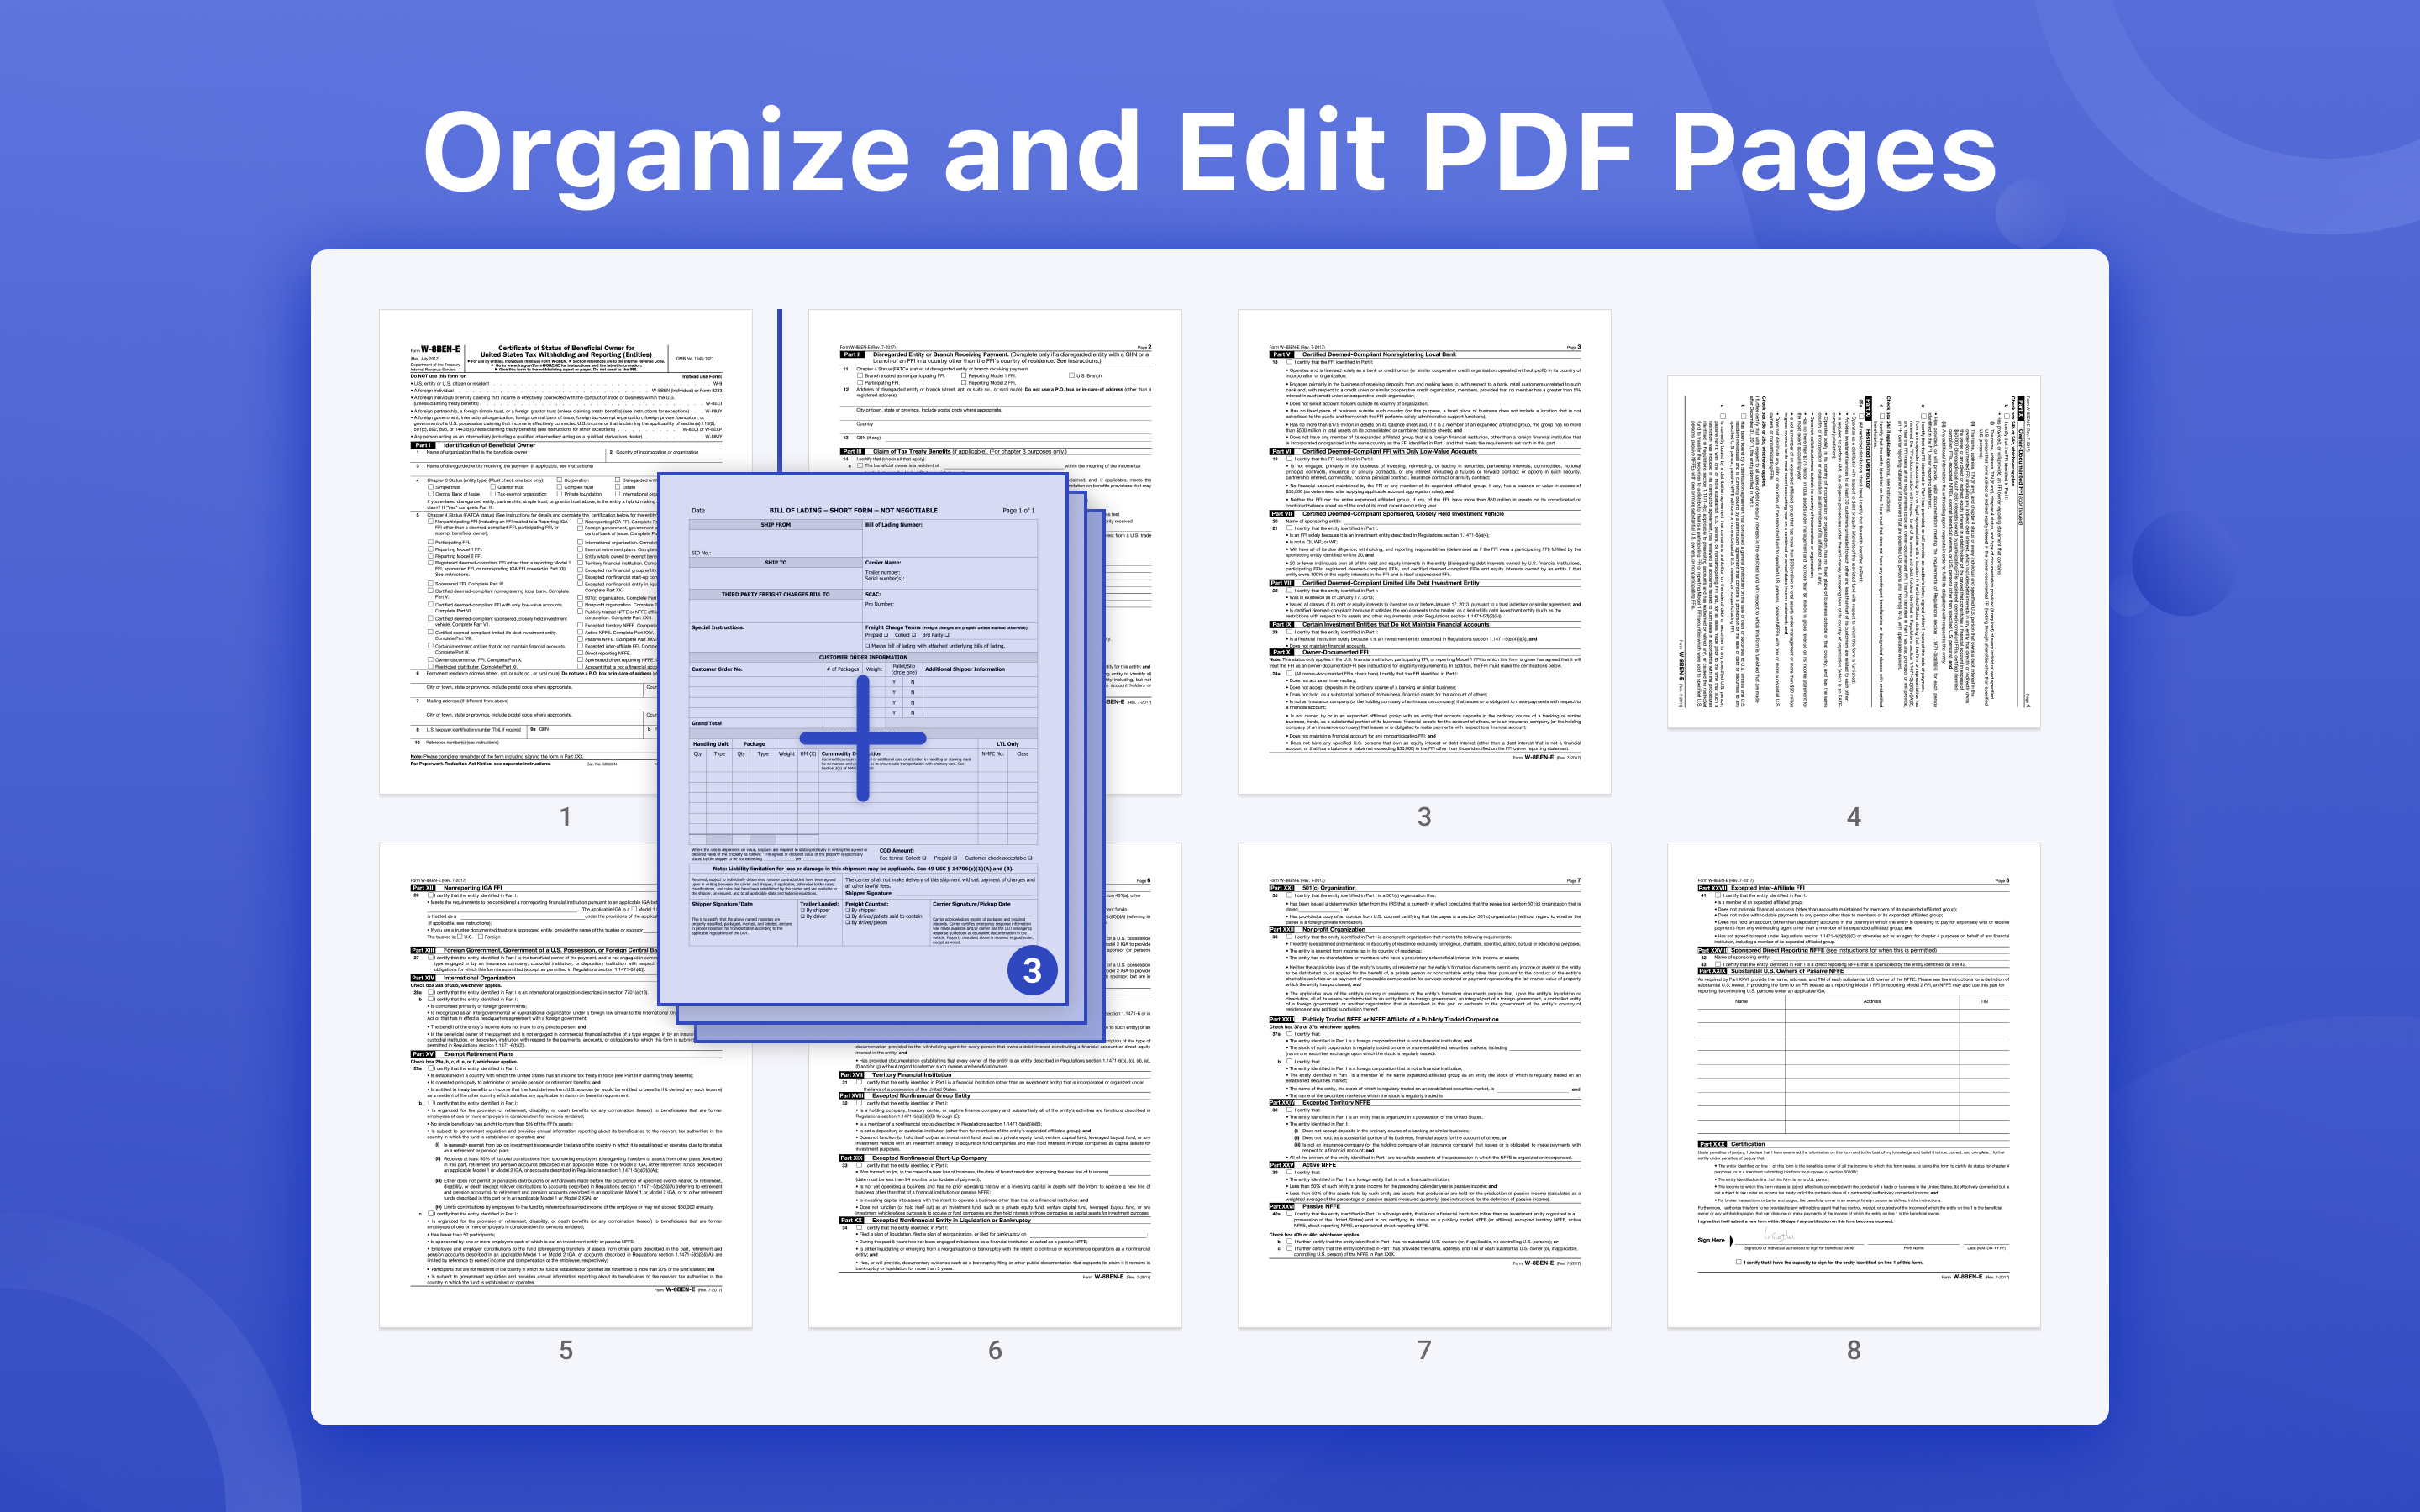 SignFlow organizing and editing PDFs